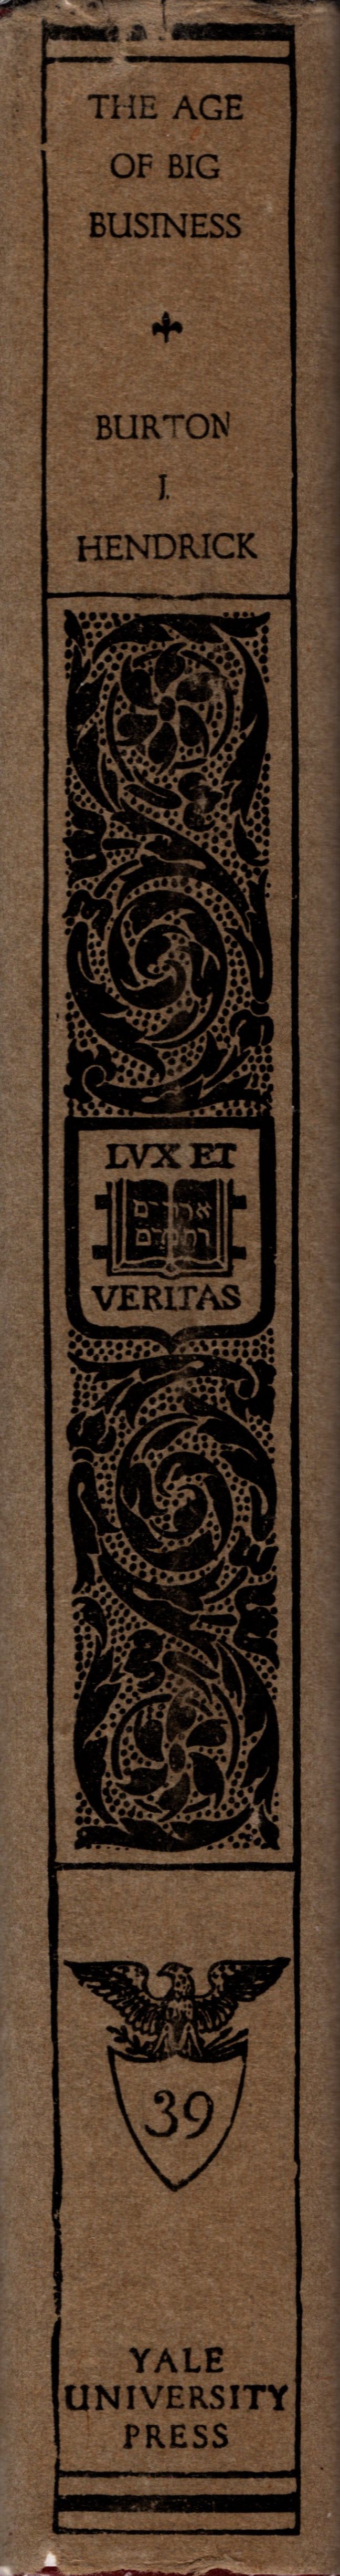 Picture of the spine of the dust cover of Burton J. Hendrick's 